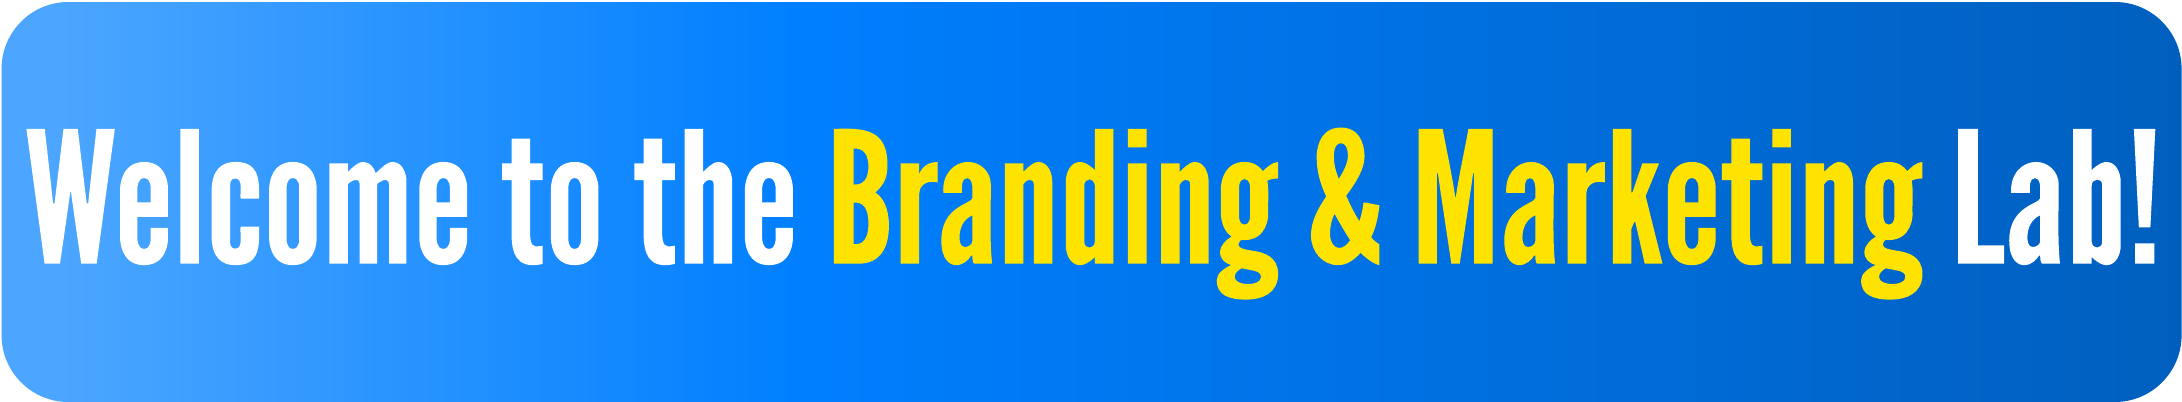 Welcome to the Branding & Marketing Lab!